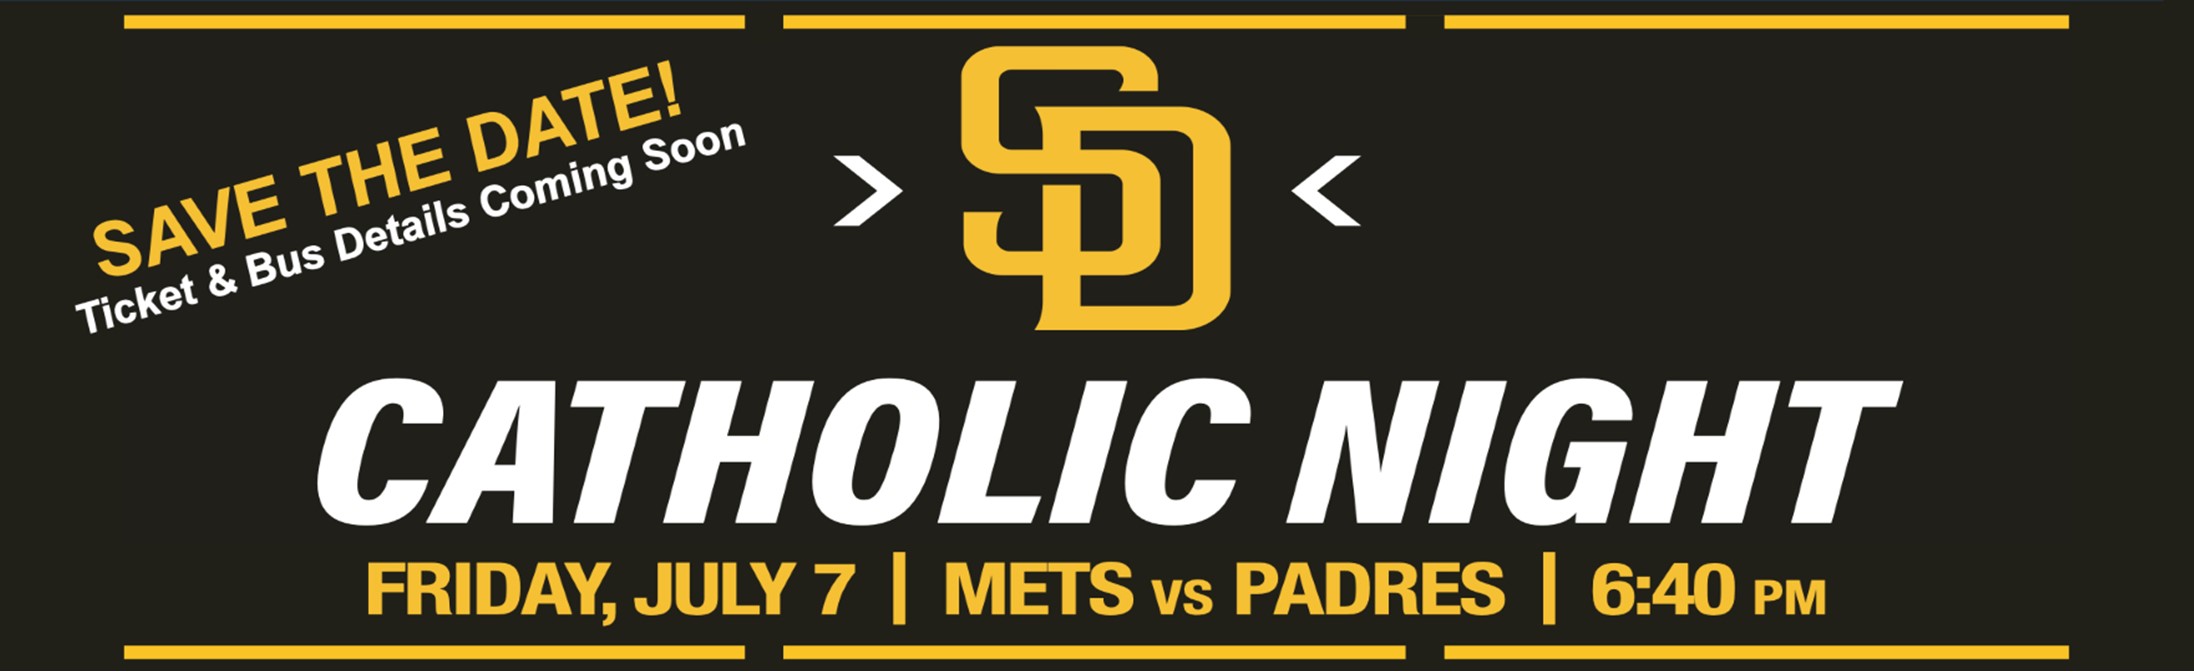 Catholic Night at the Padres – Friday, July 7 – Sign Up Now!